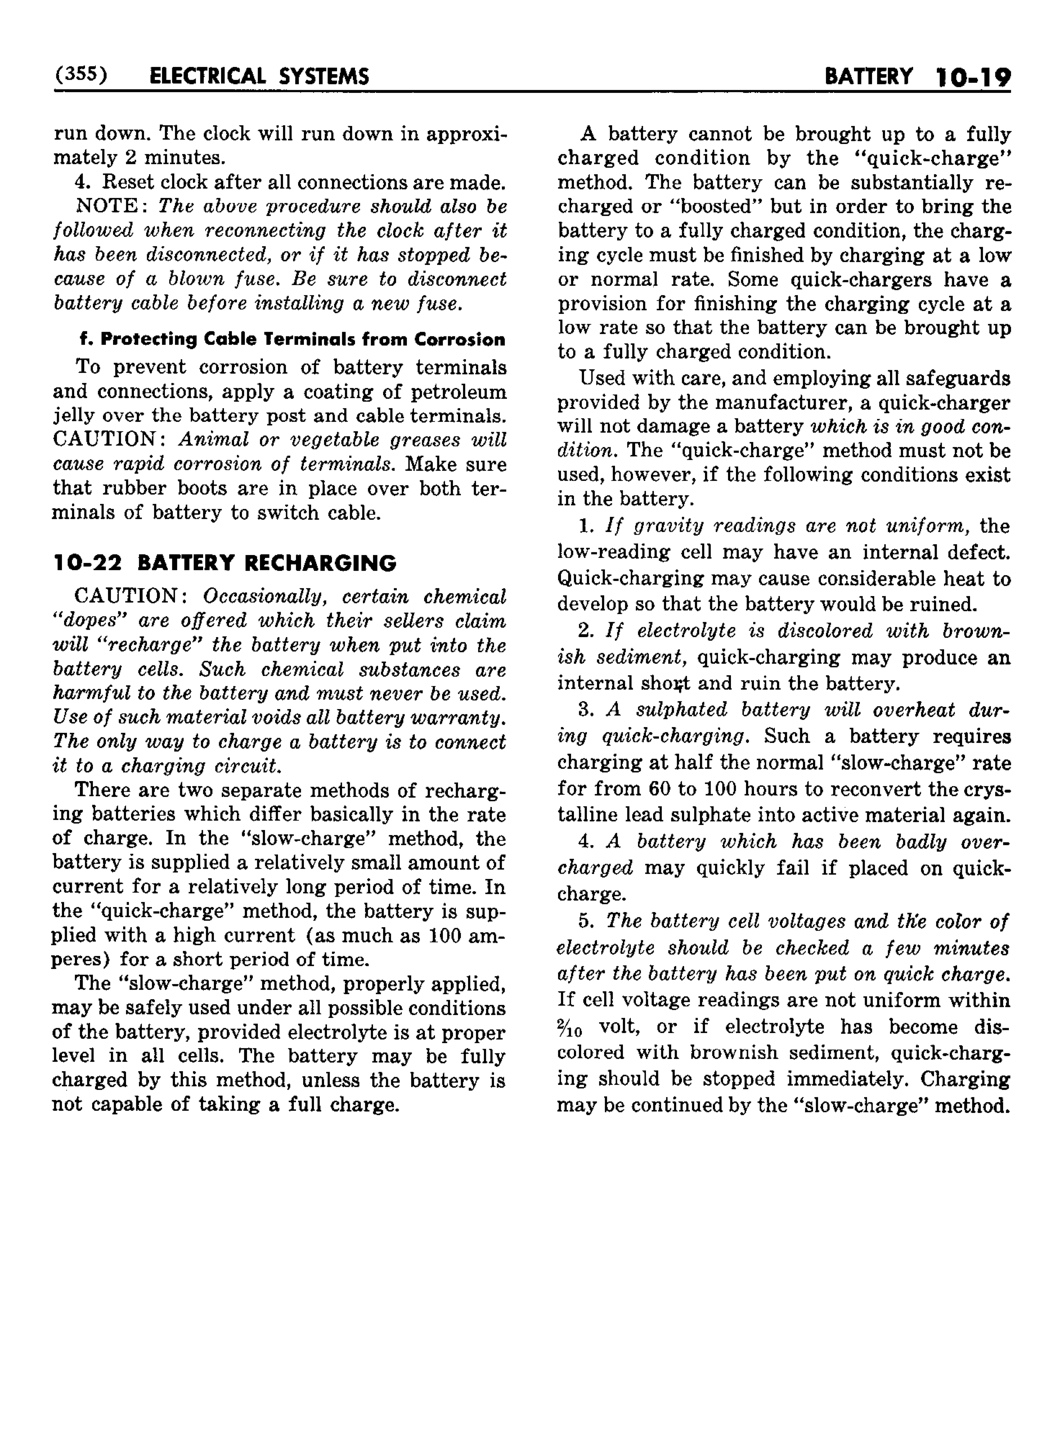 n_11 1952 Buick Shop Manual - Electrical Systems-019-019.jpg